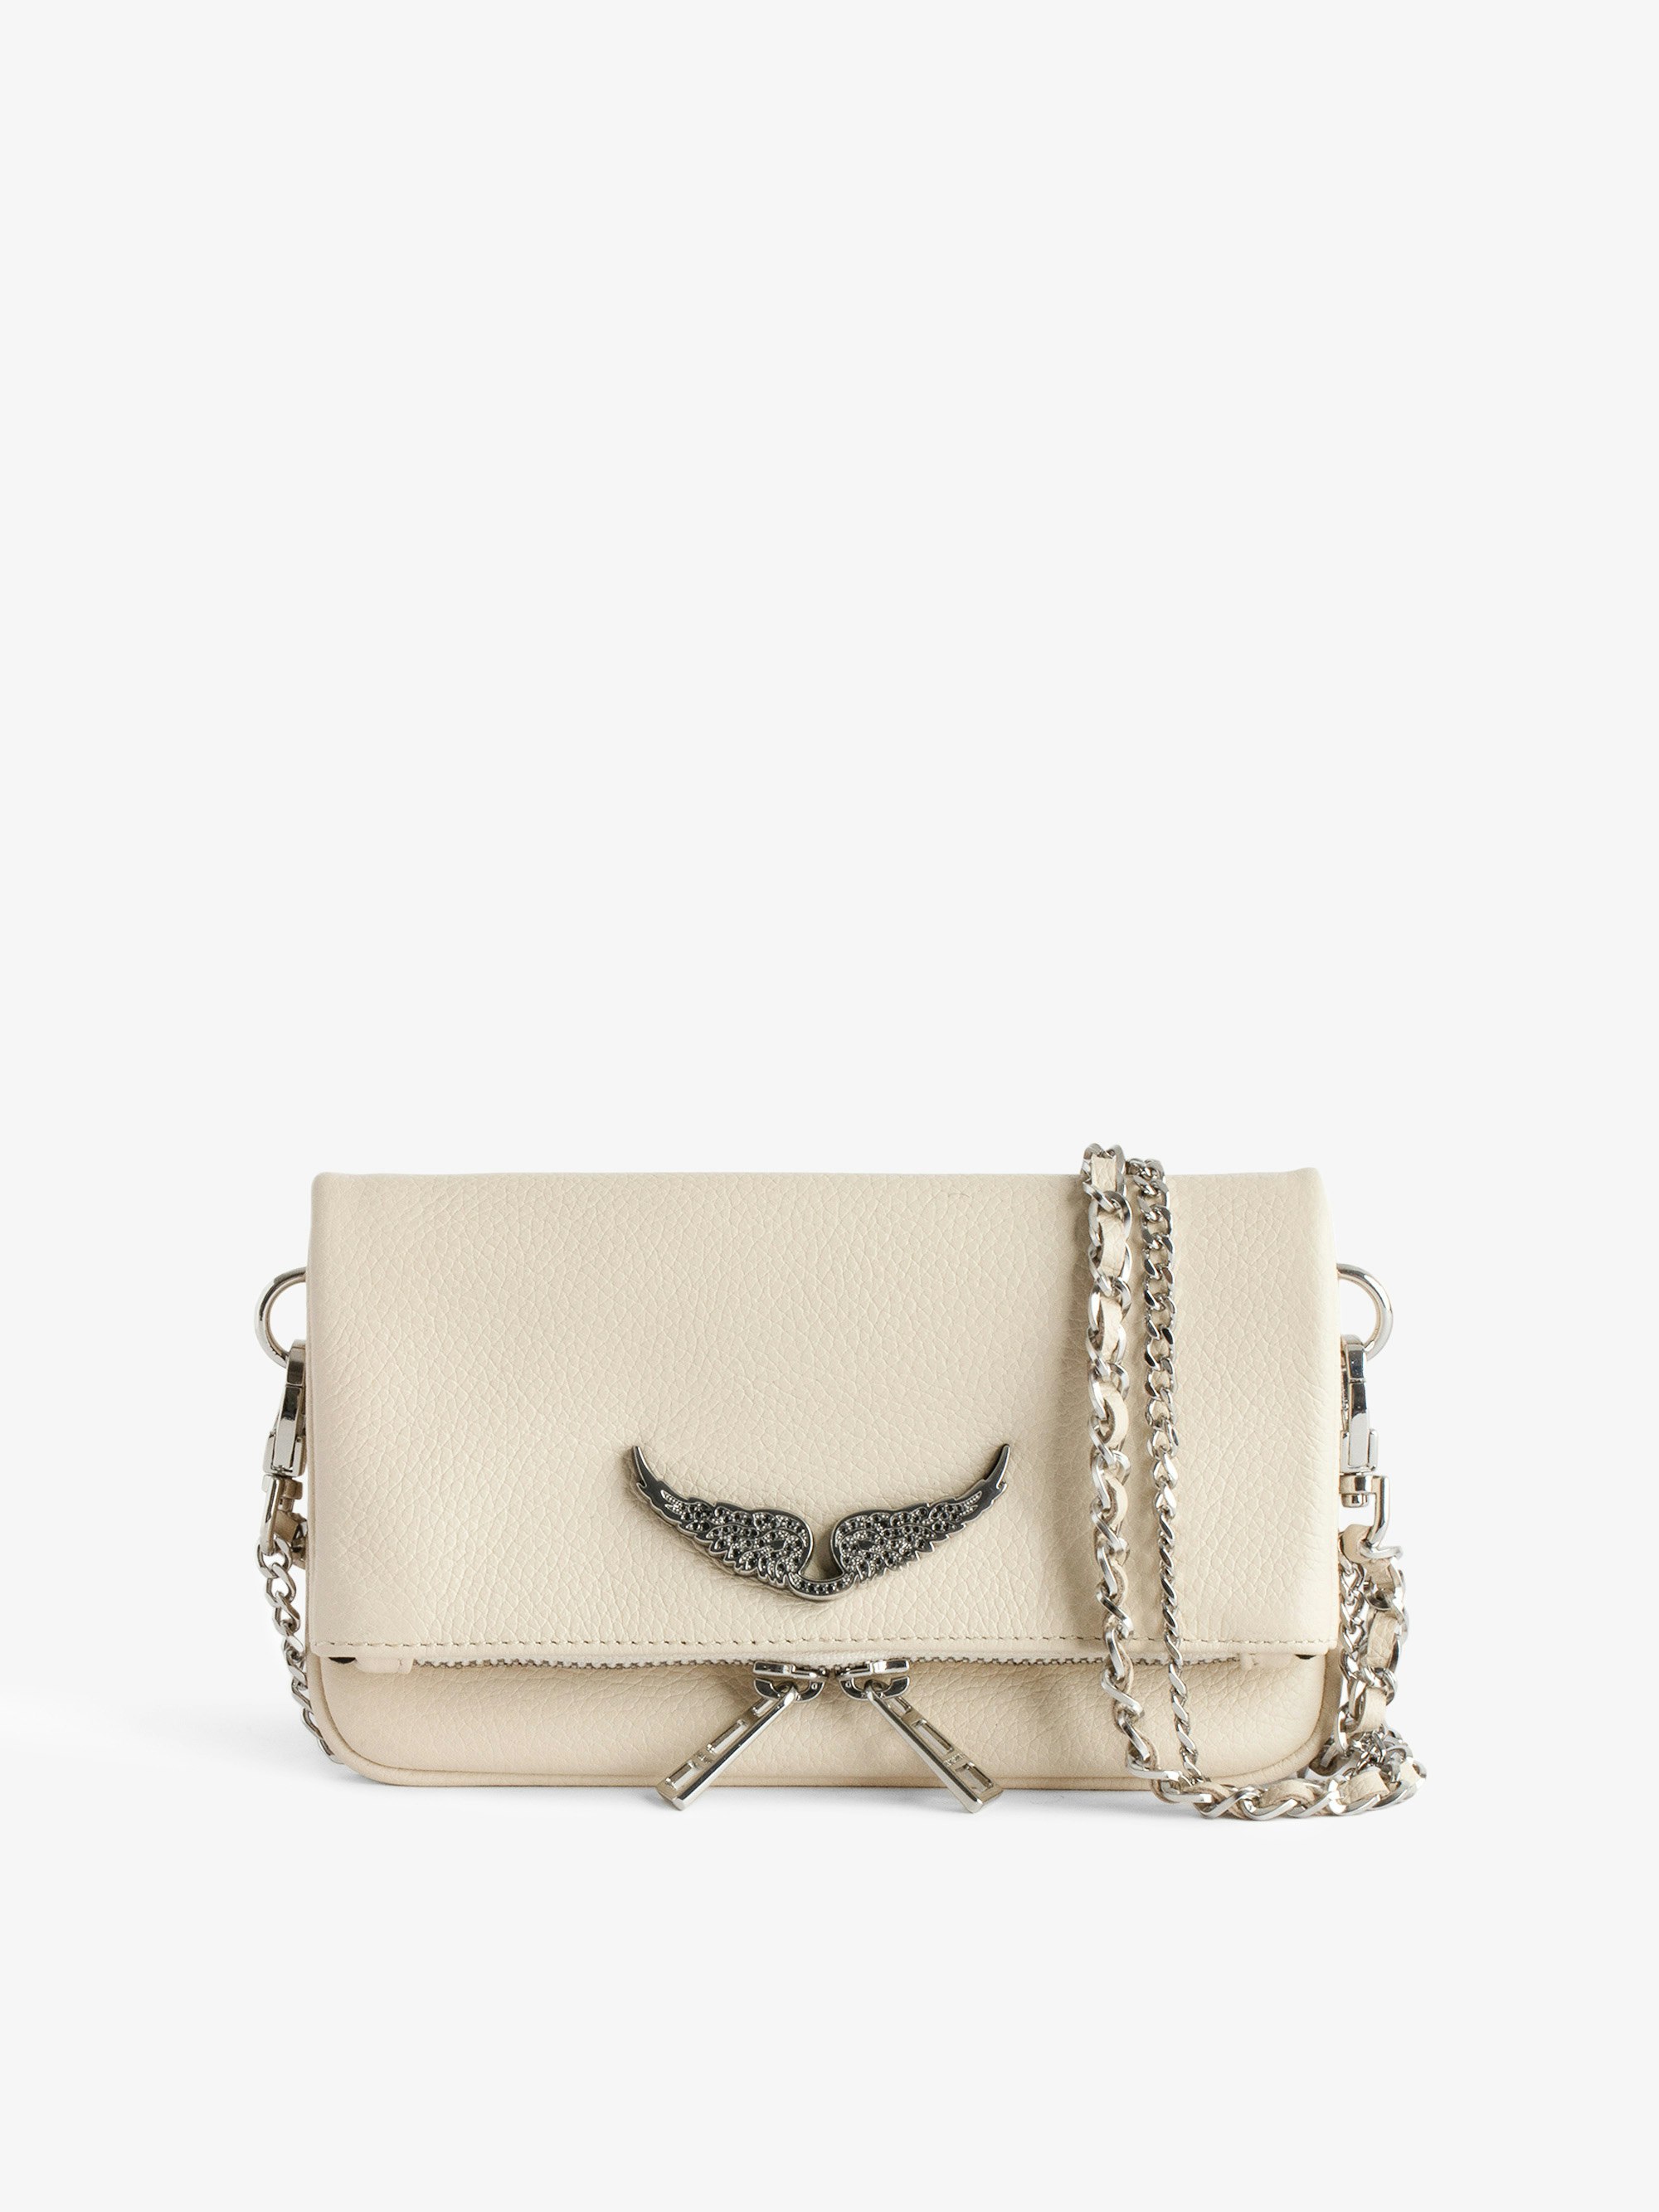 Swing Your Wings Rock Nano Clutch - Women’s white grained leather Swing Your Wings Rock Nano clutch with leather shoulder strap and chain